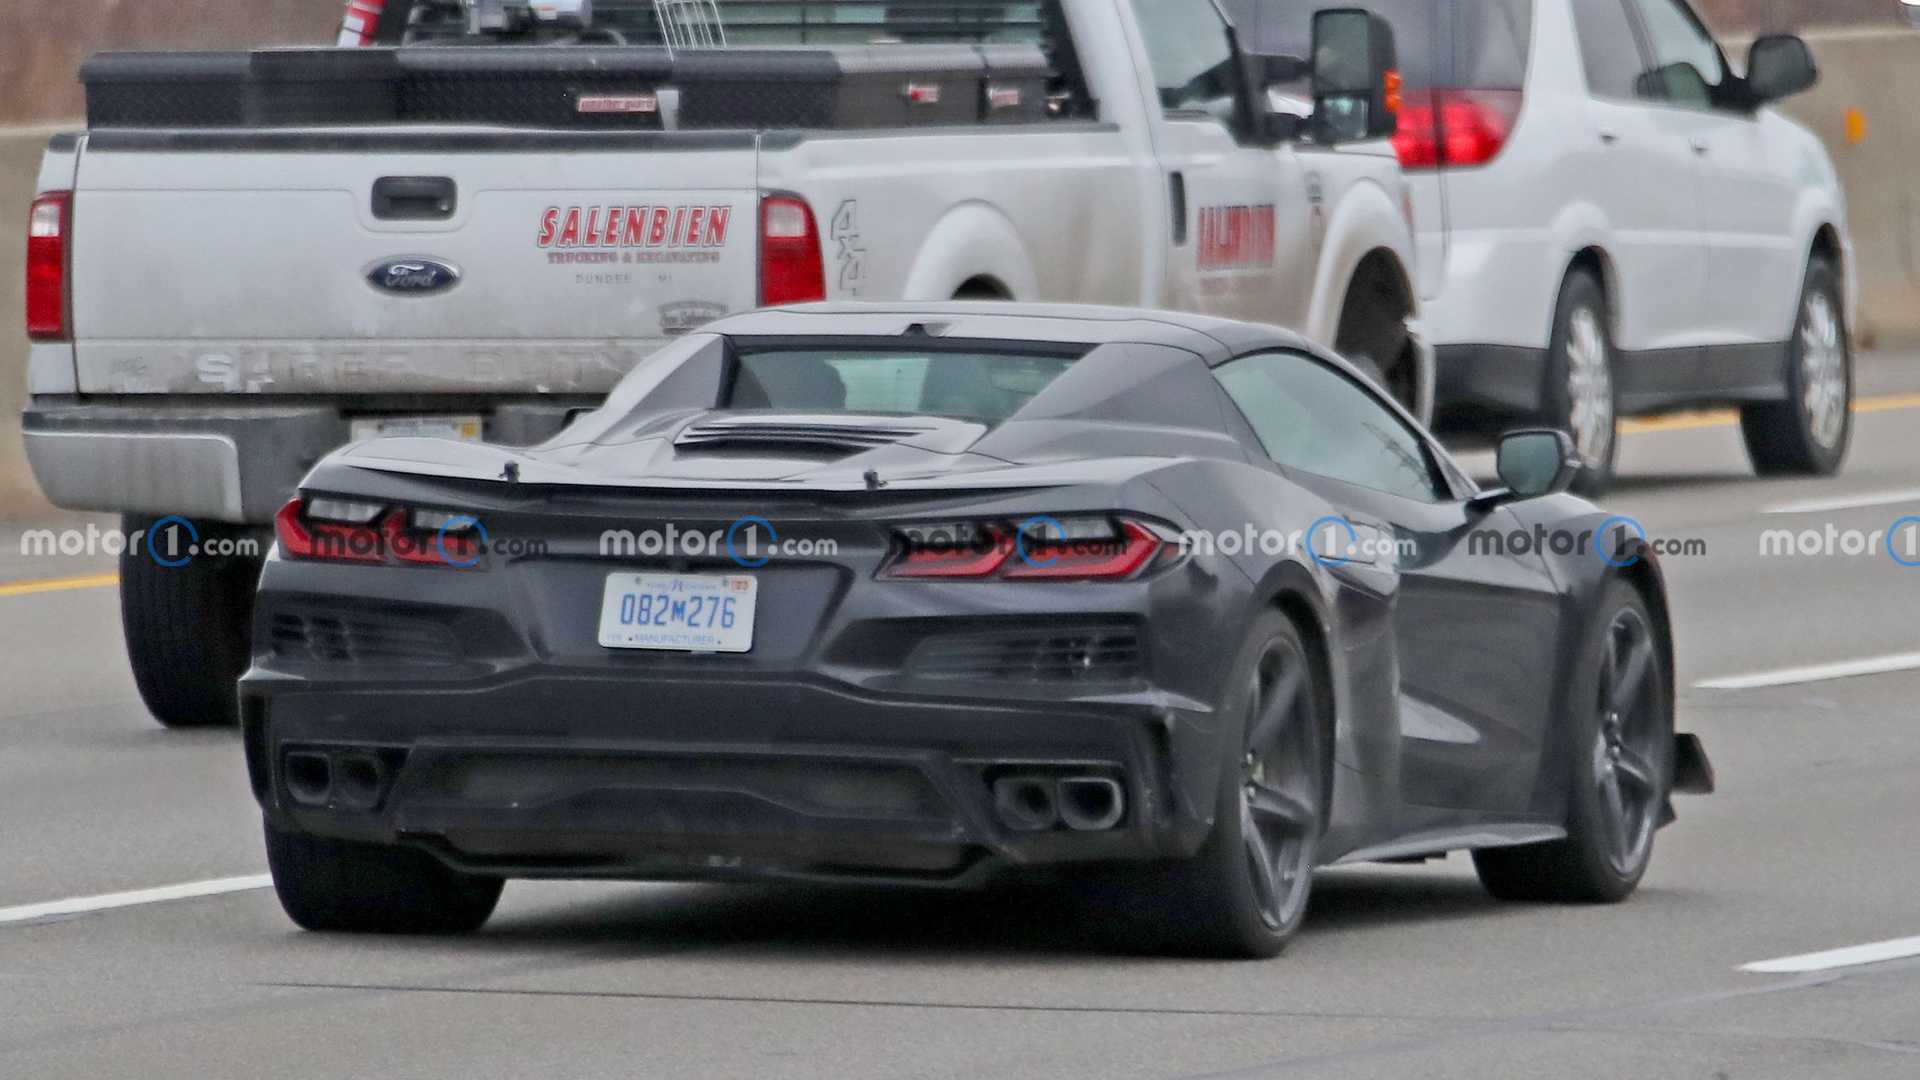 The rear of the Corvette C8 E-Ray and ZR1 test mule